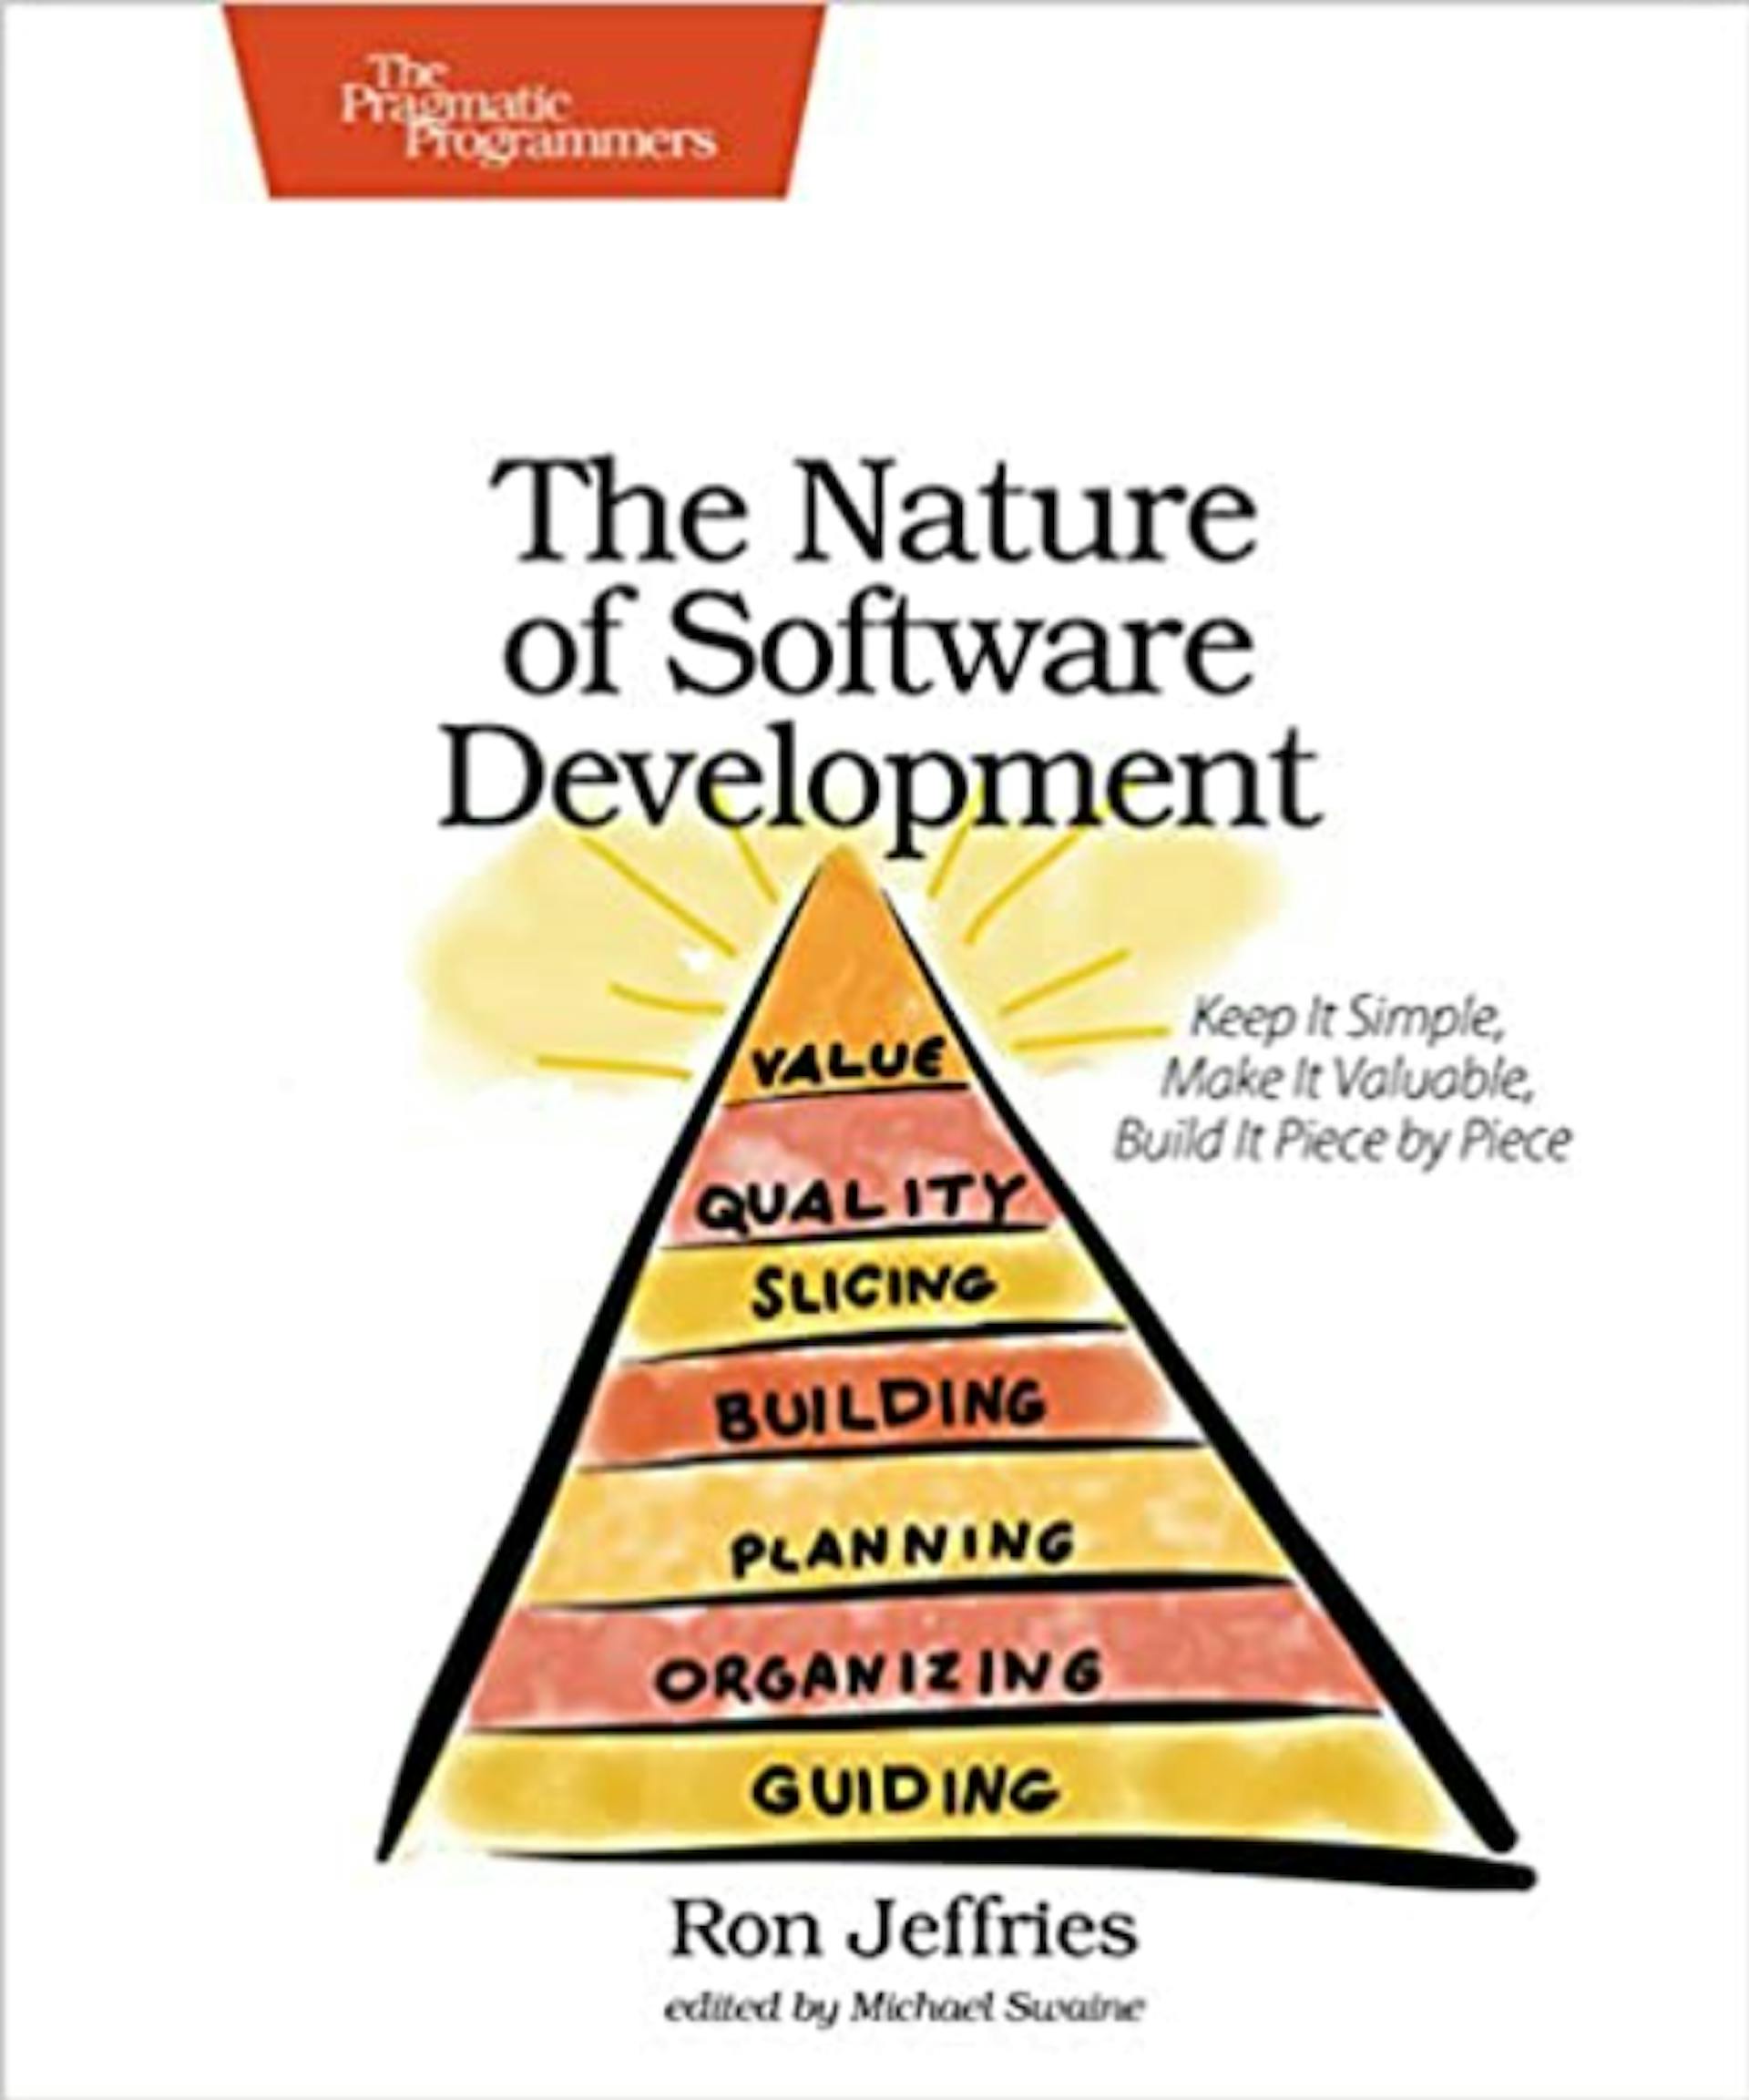 The Nature of Software Development book